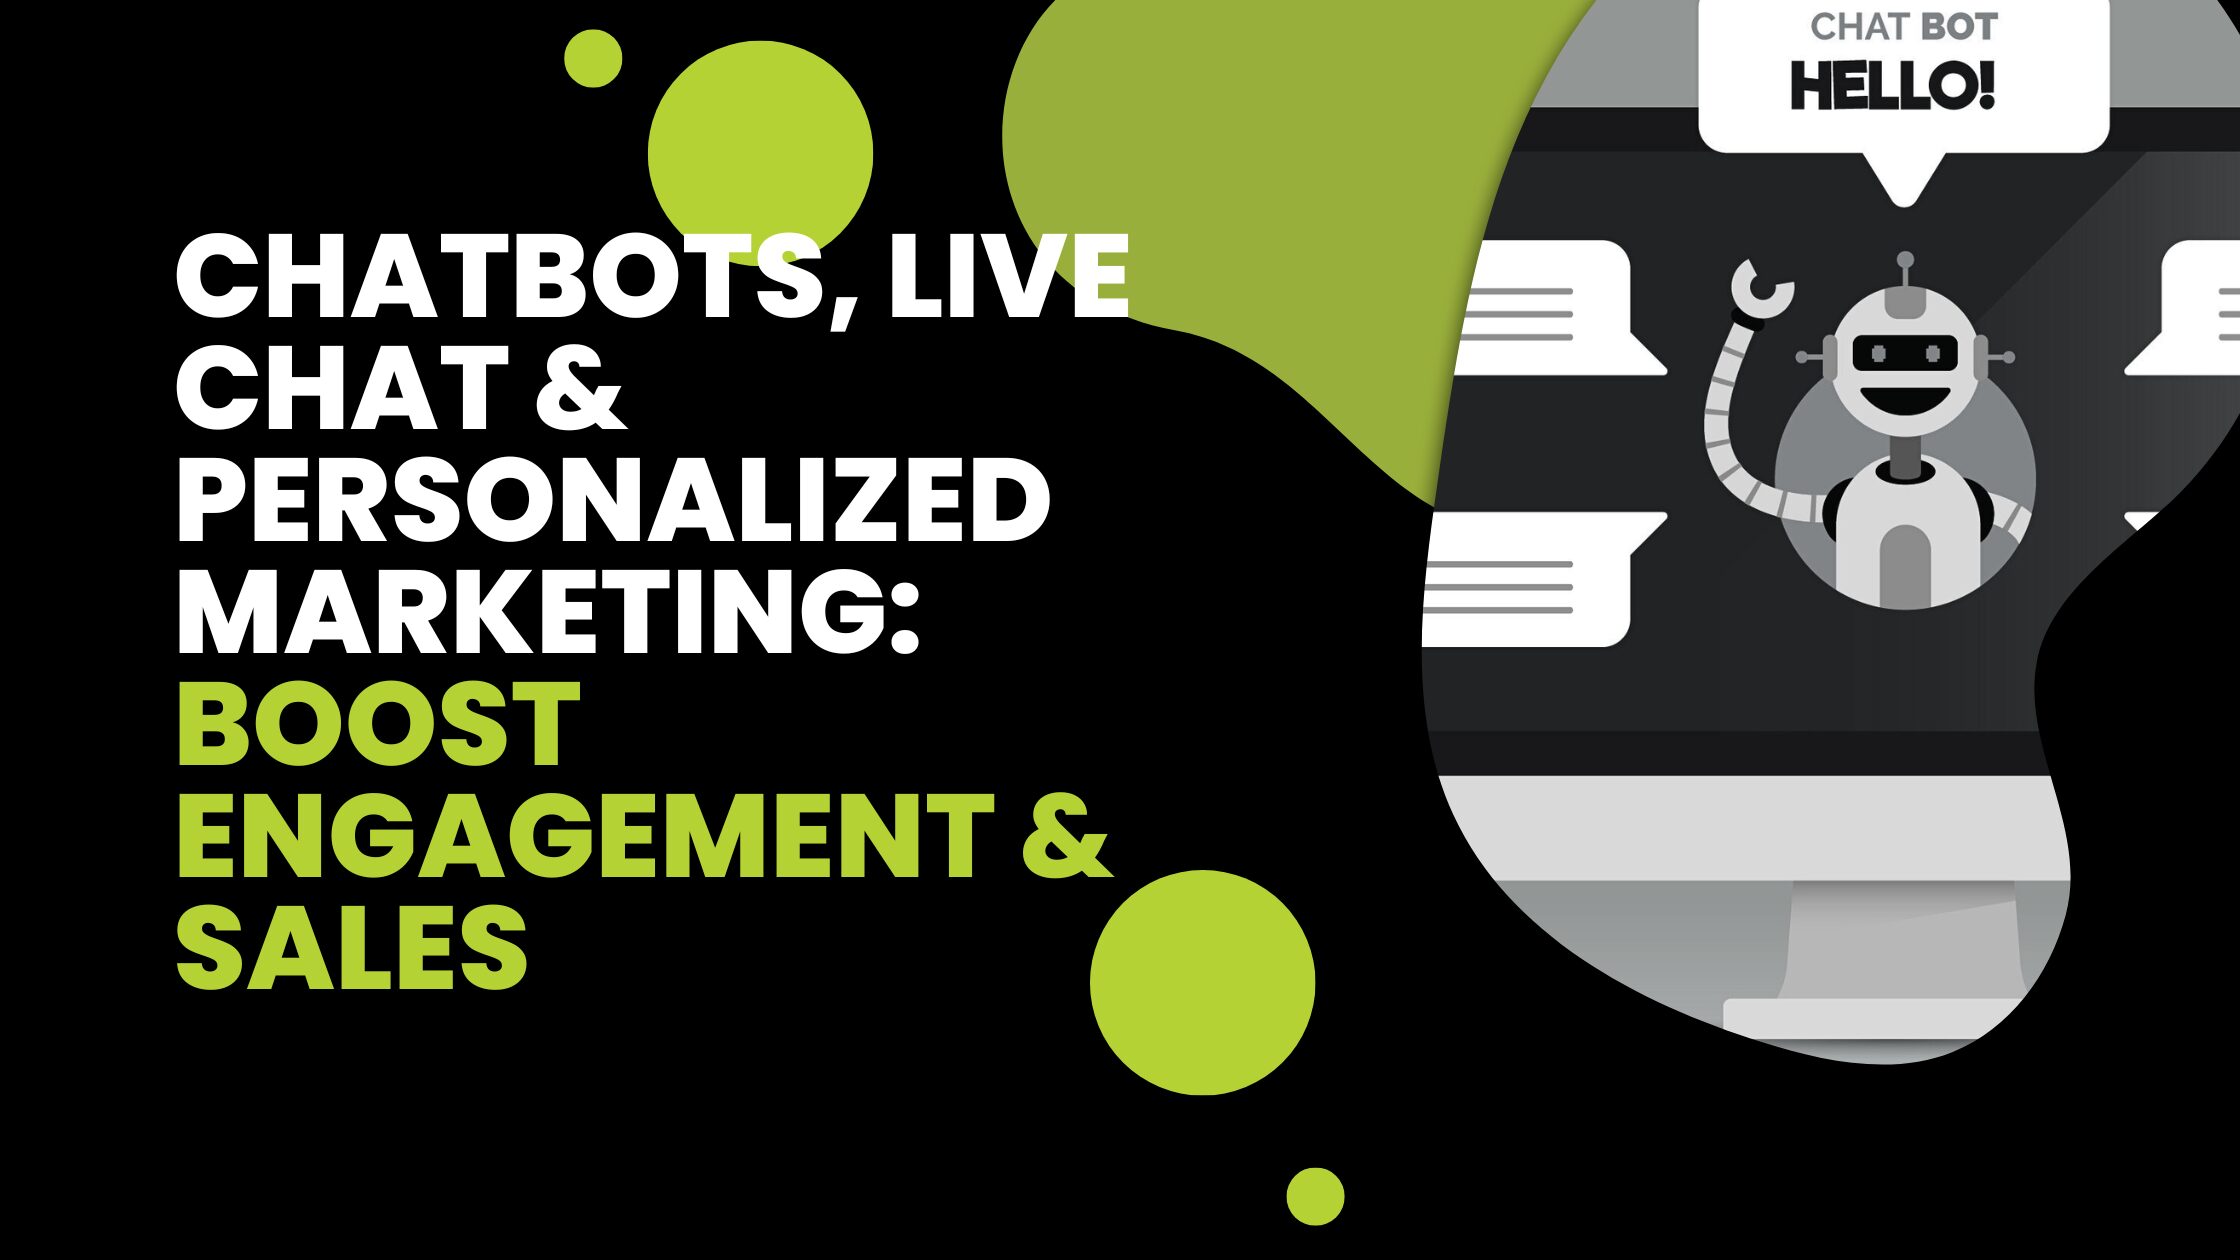 Chatbots, Live Chat & Personalized Marketing: Boost Engagement & Sales 